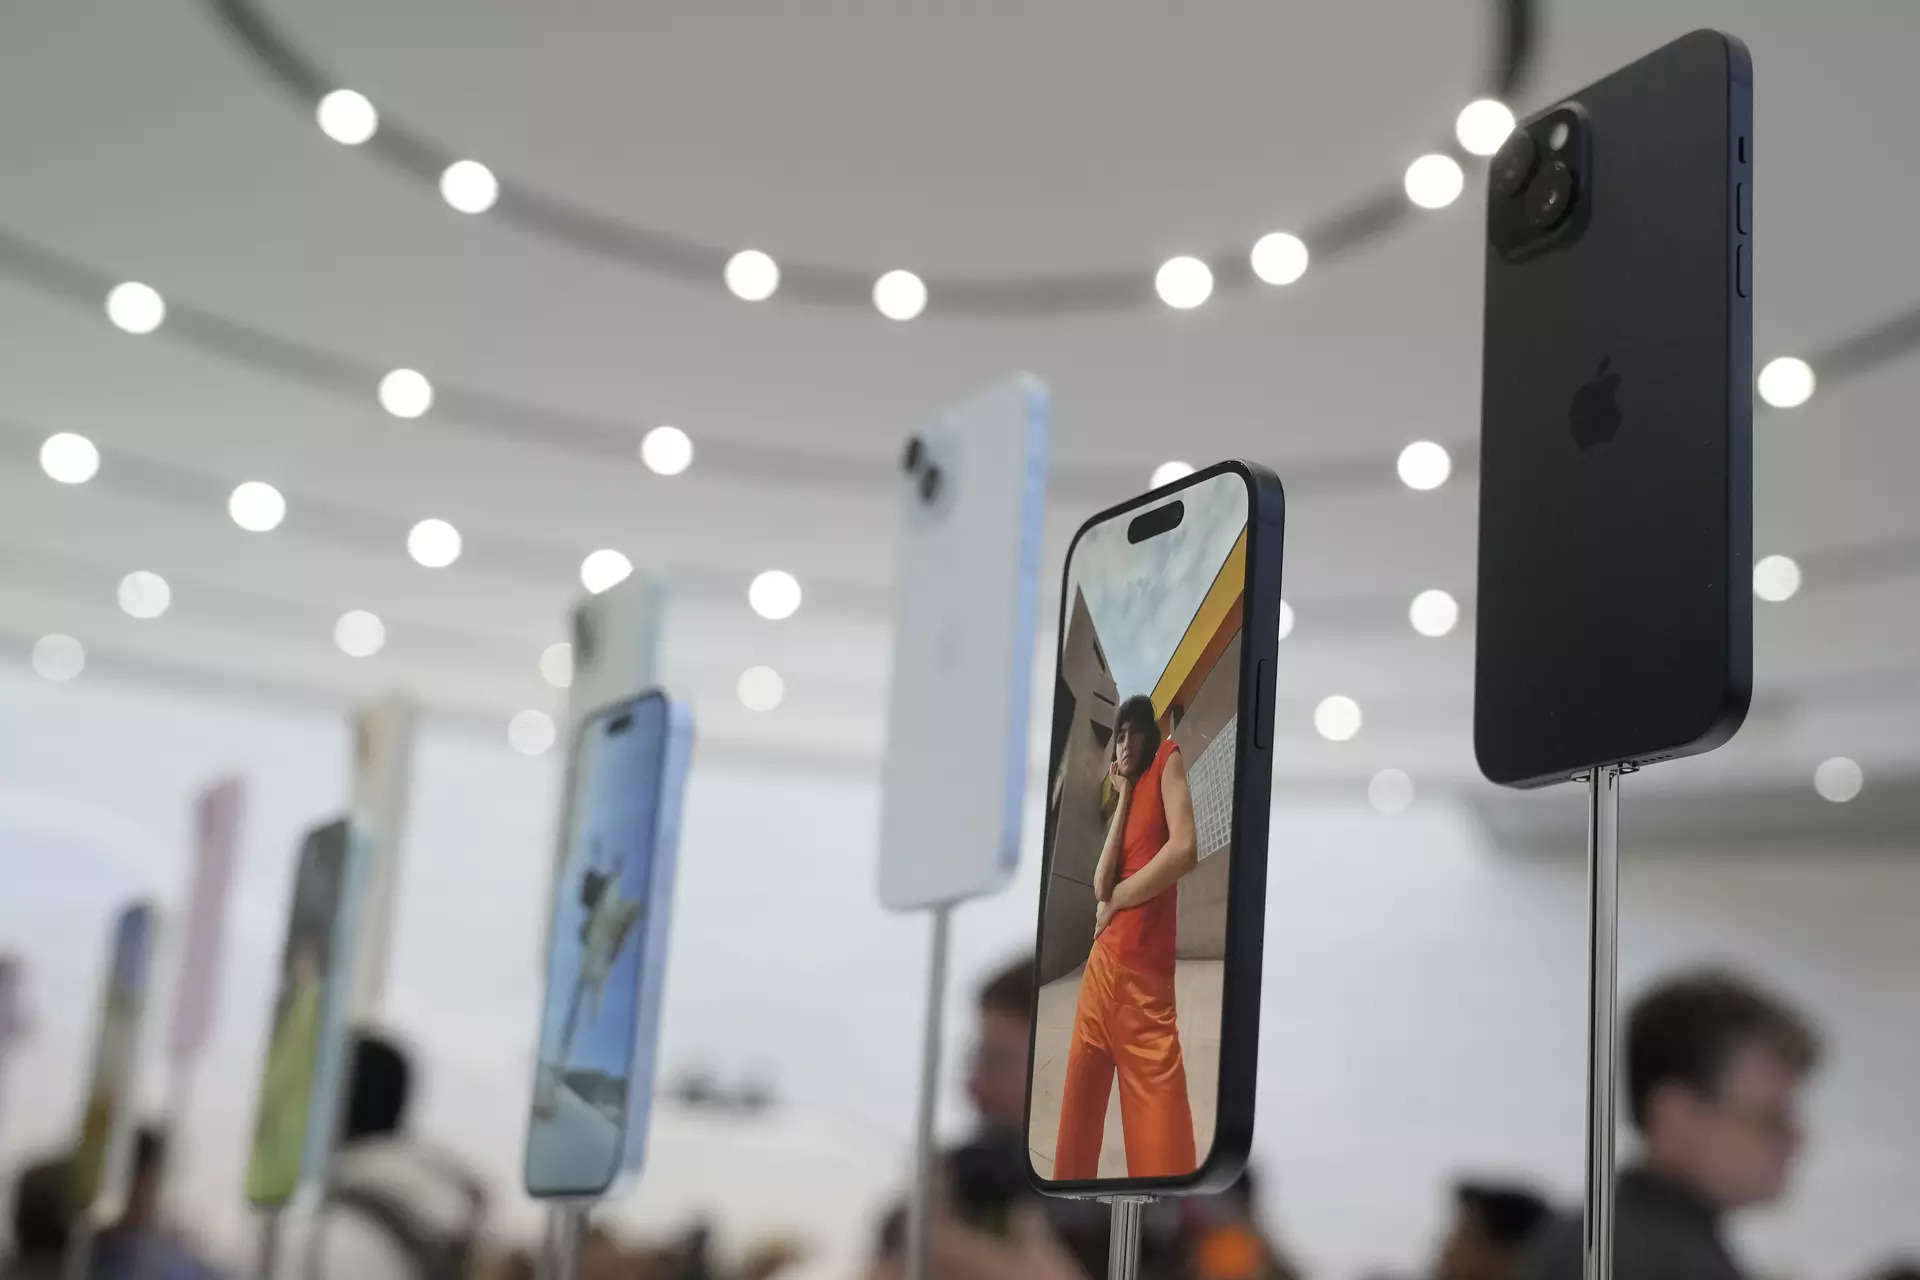 Apple slashes iPhone prices in China amid fierce Huawei competition 